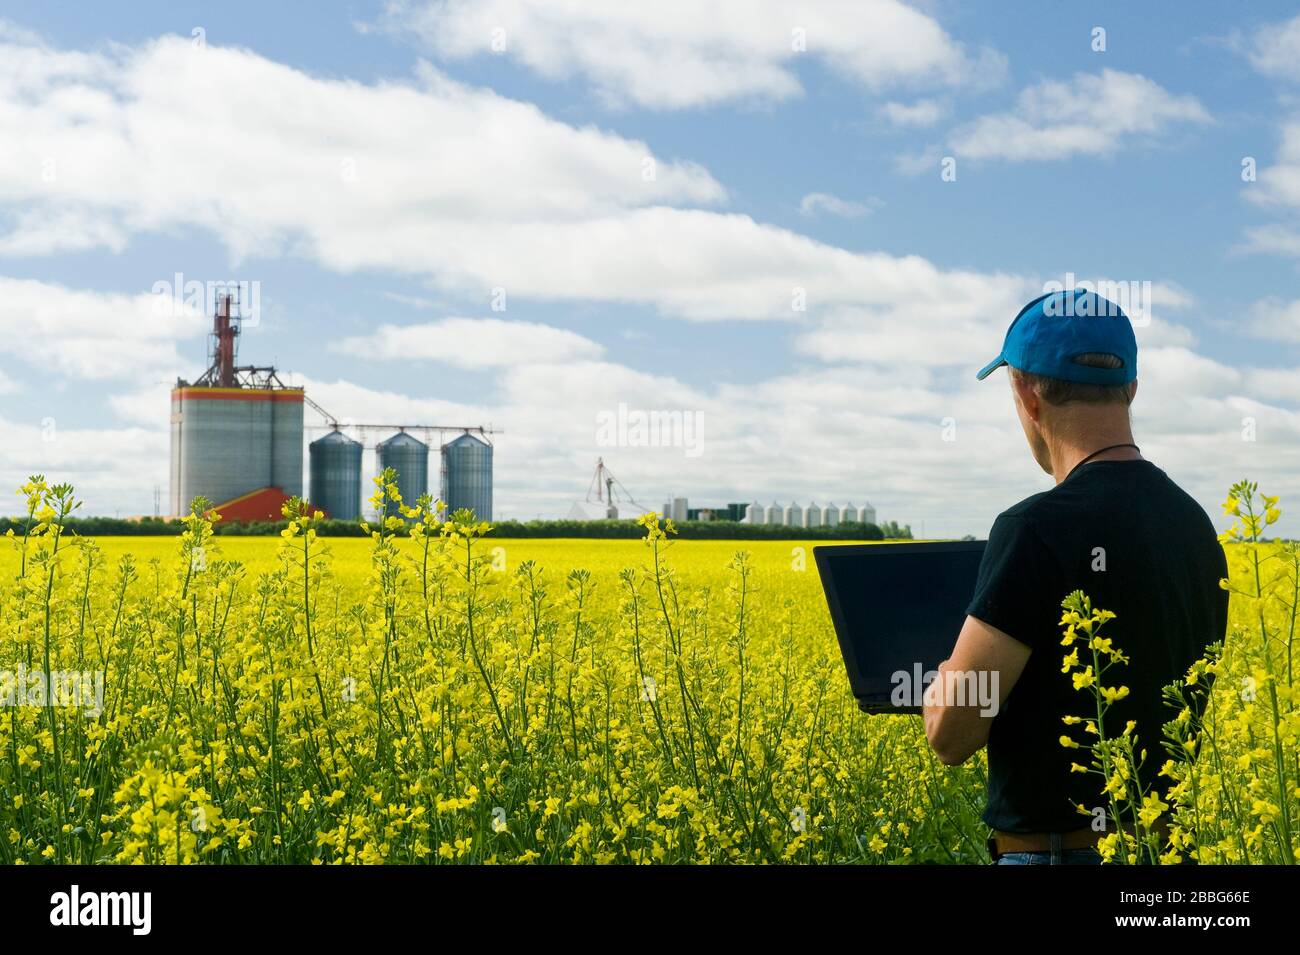 a man uses a computer in a bloom stage canola field,  inland grain terminal in the background, Brunkild, Manitoba, Canada Stock Photo